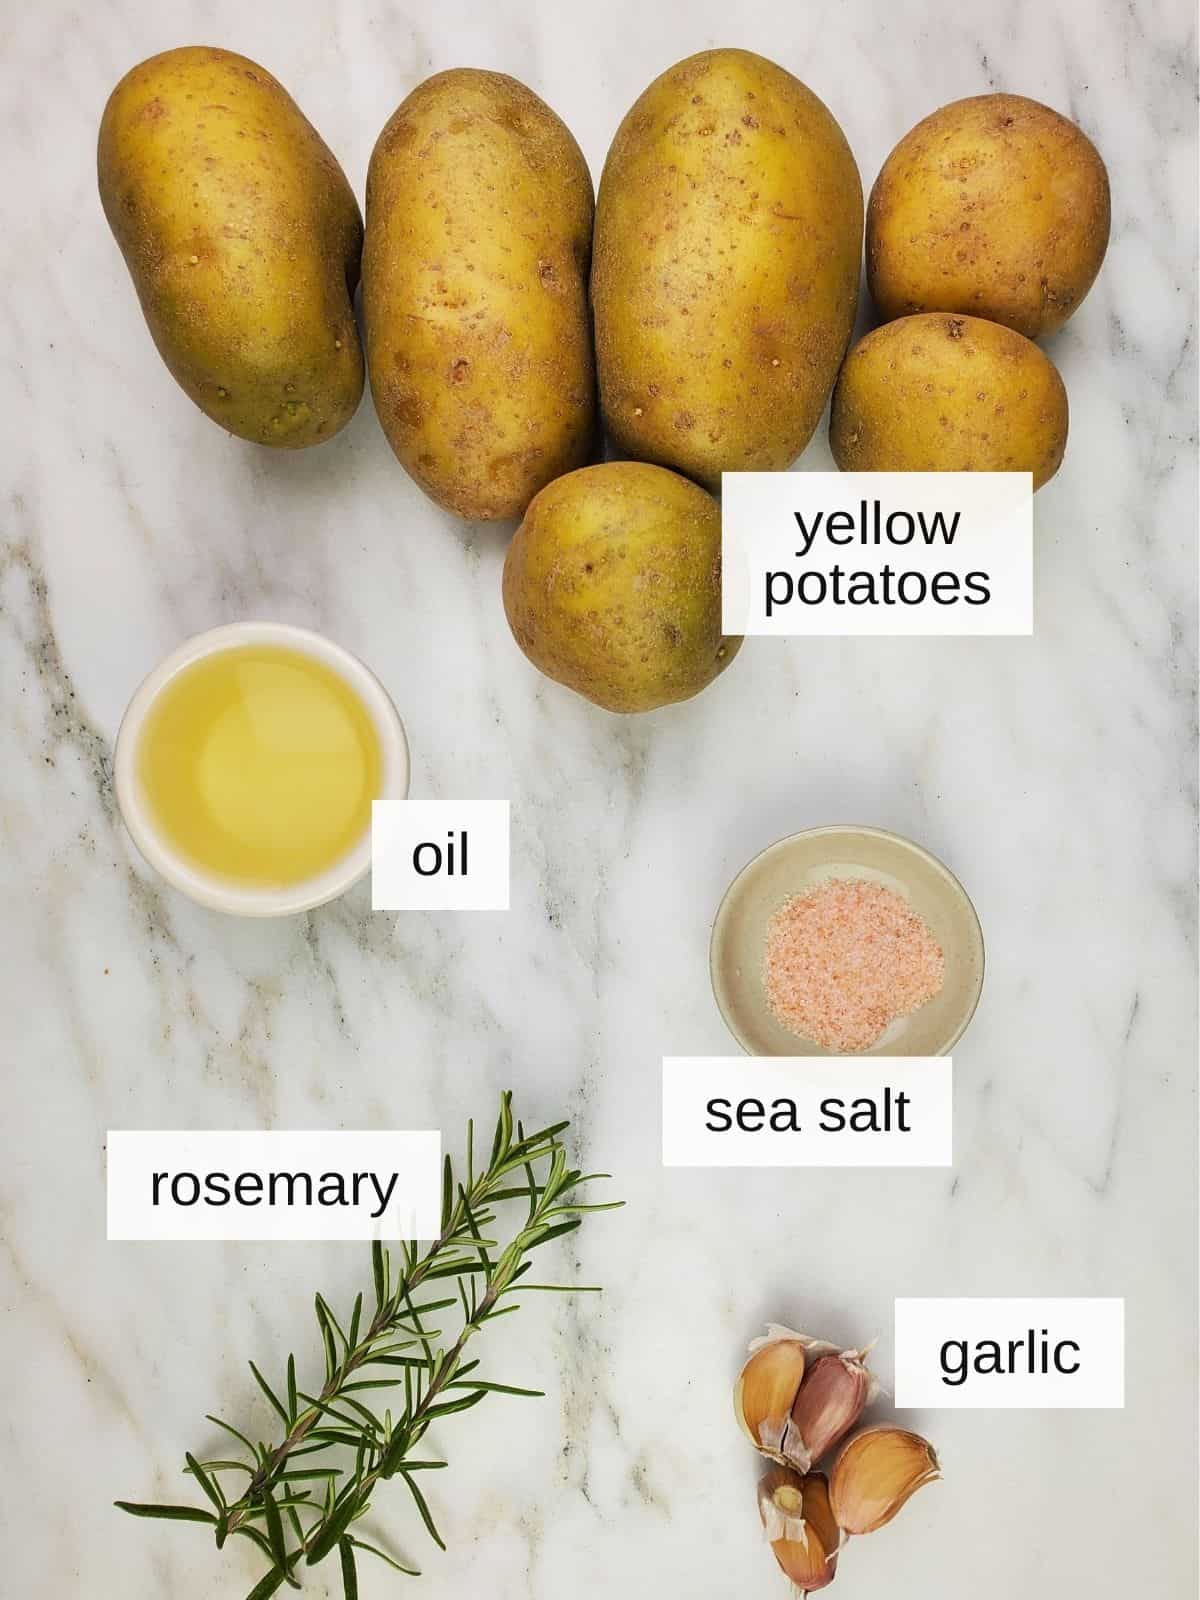 ingredients for making parmentier potatoes, including yellow potatoes, oil, sea salt, rosemary, and garlic.